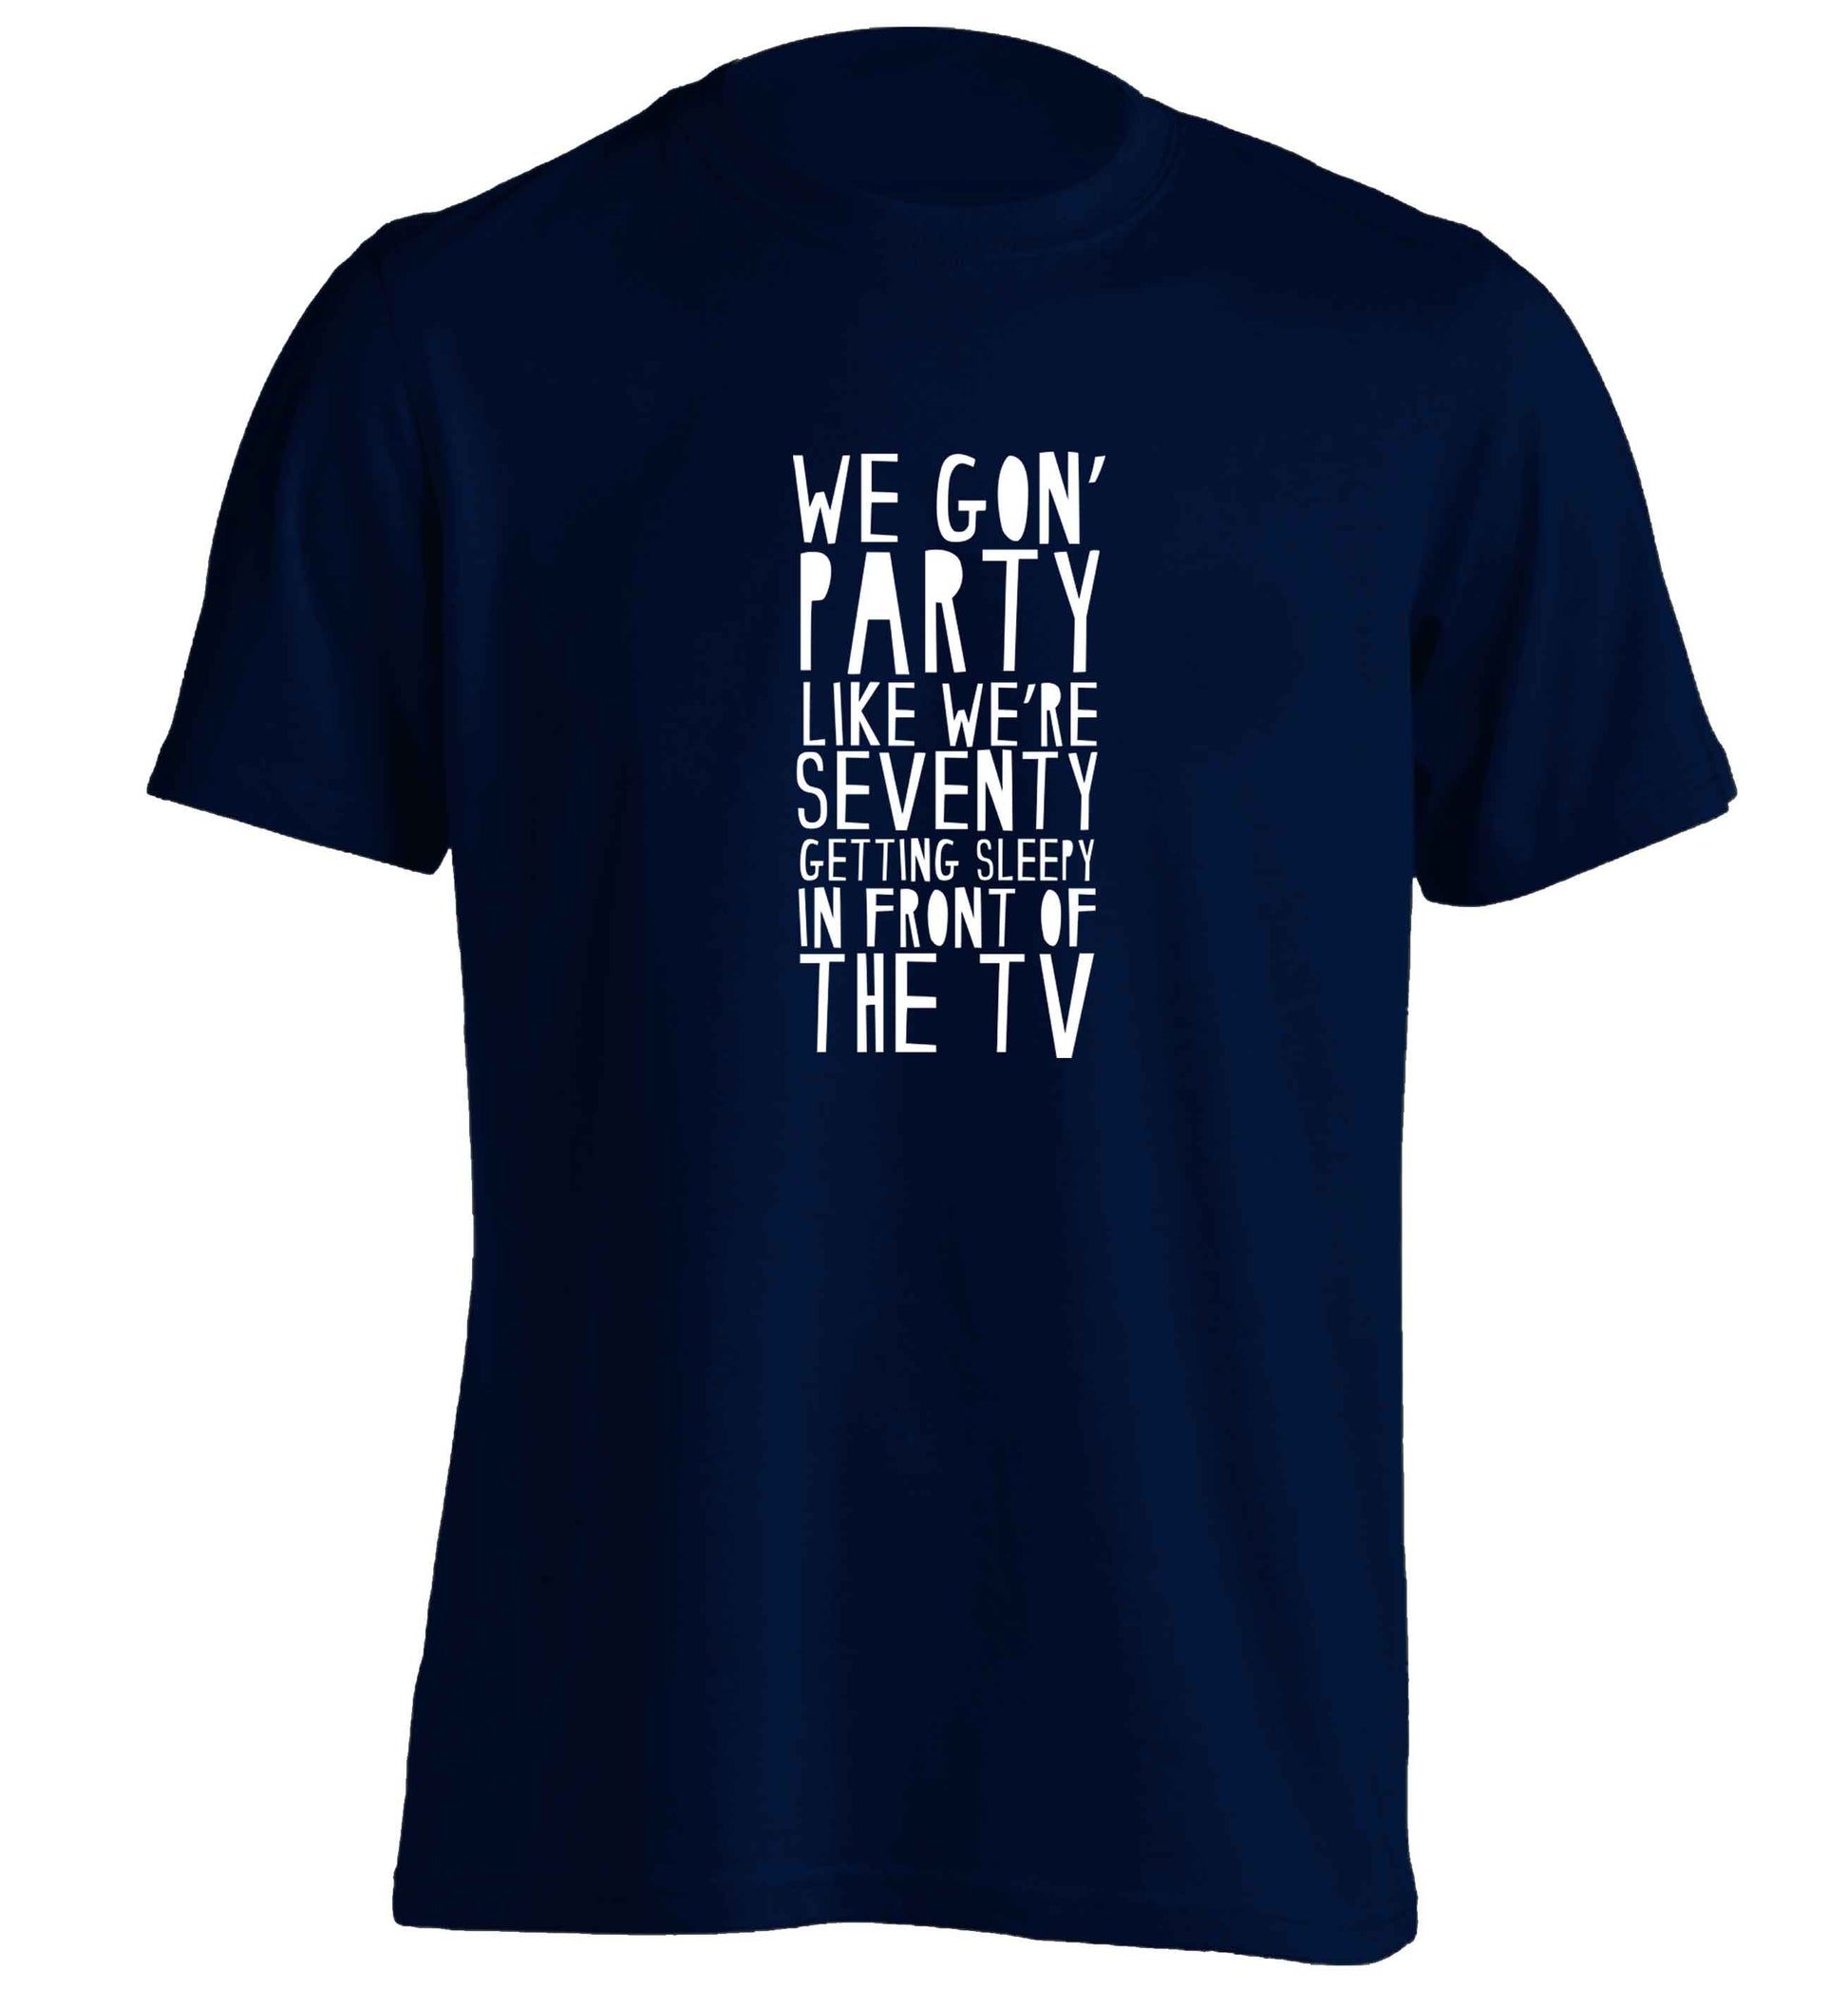 We gon' party like we're seventy getting sleepy in front of the TV adults unisex navy Tshirt 2XL